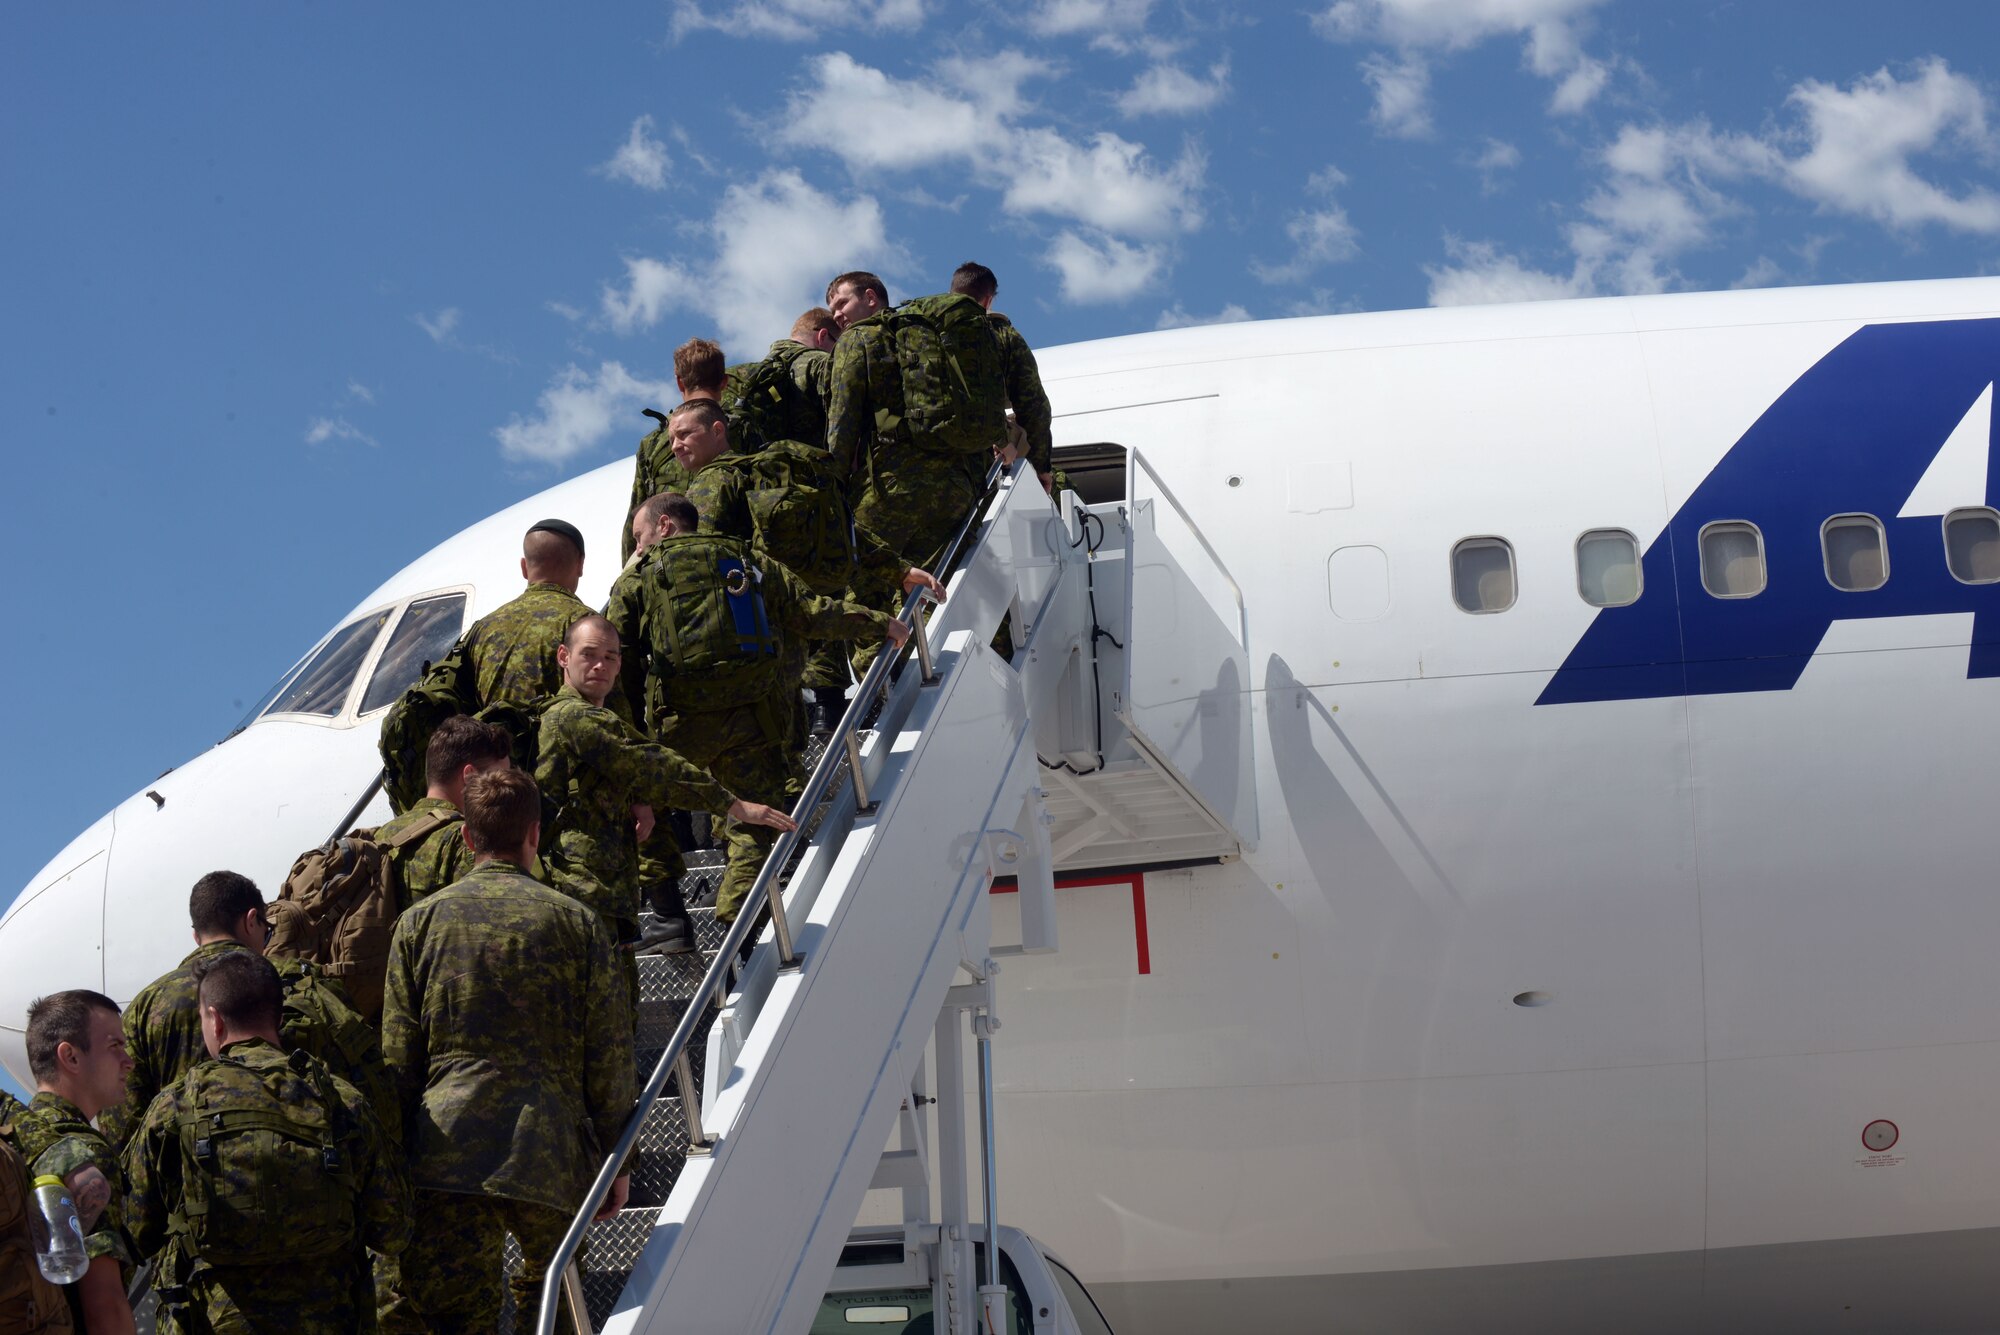 Members of the 41 Canadian Brigade Group depart Ellsworth Air Force Base, S.D., June 23, 2016. While in South Dakota, Task Force 41 assisted National Guard units during timber hauls, bridge repairs, and took part in lane training at West Camp Rapid with the 28th Civil Engineer Squadron during the South Dakota National Guard’s Golden Coyote exercise.  (U.S. Air Force photo by Airman Donald Knechtel/Released)